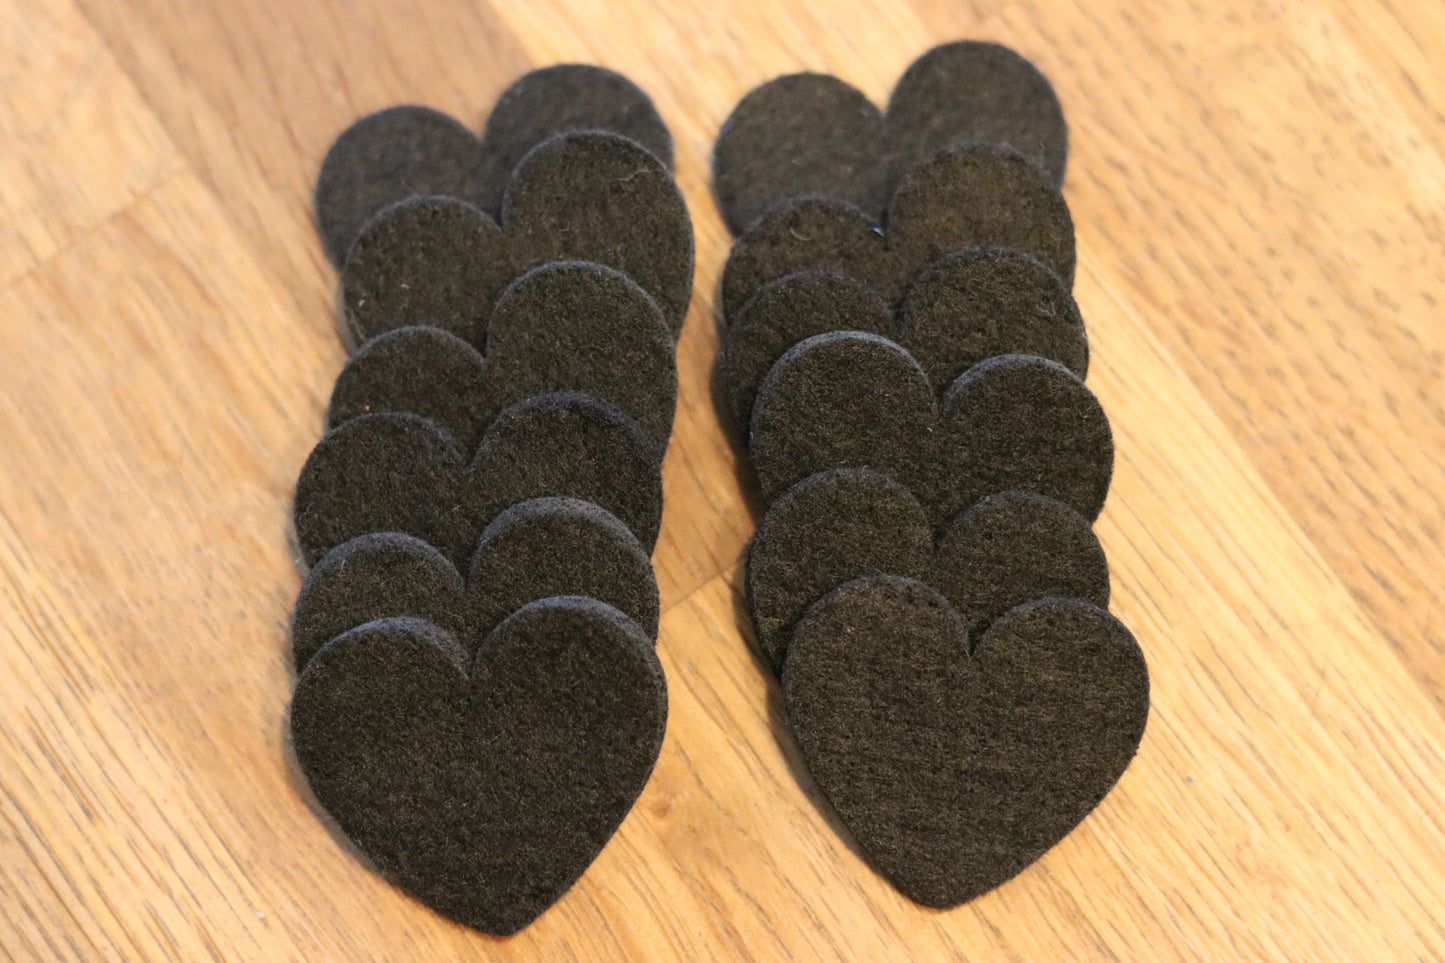 12 Replacement pads for felt diffuser